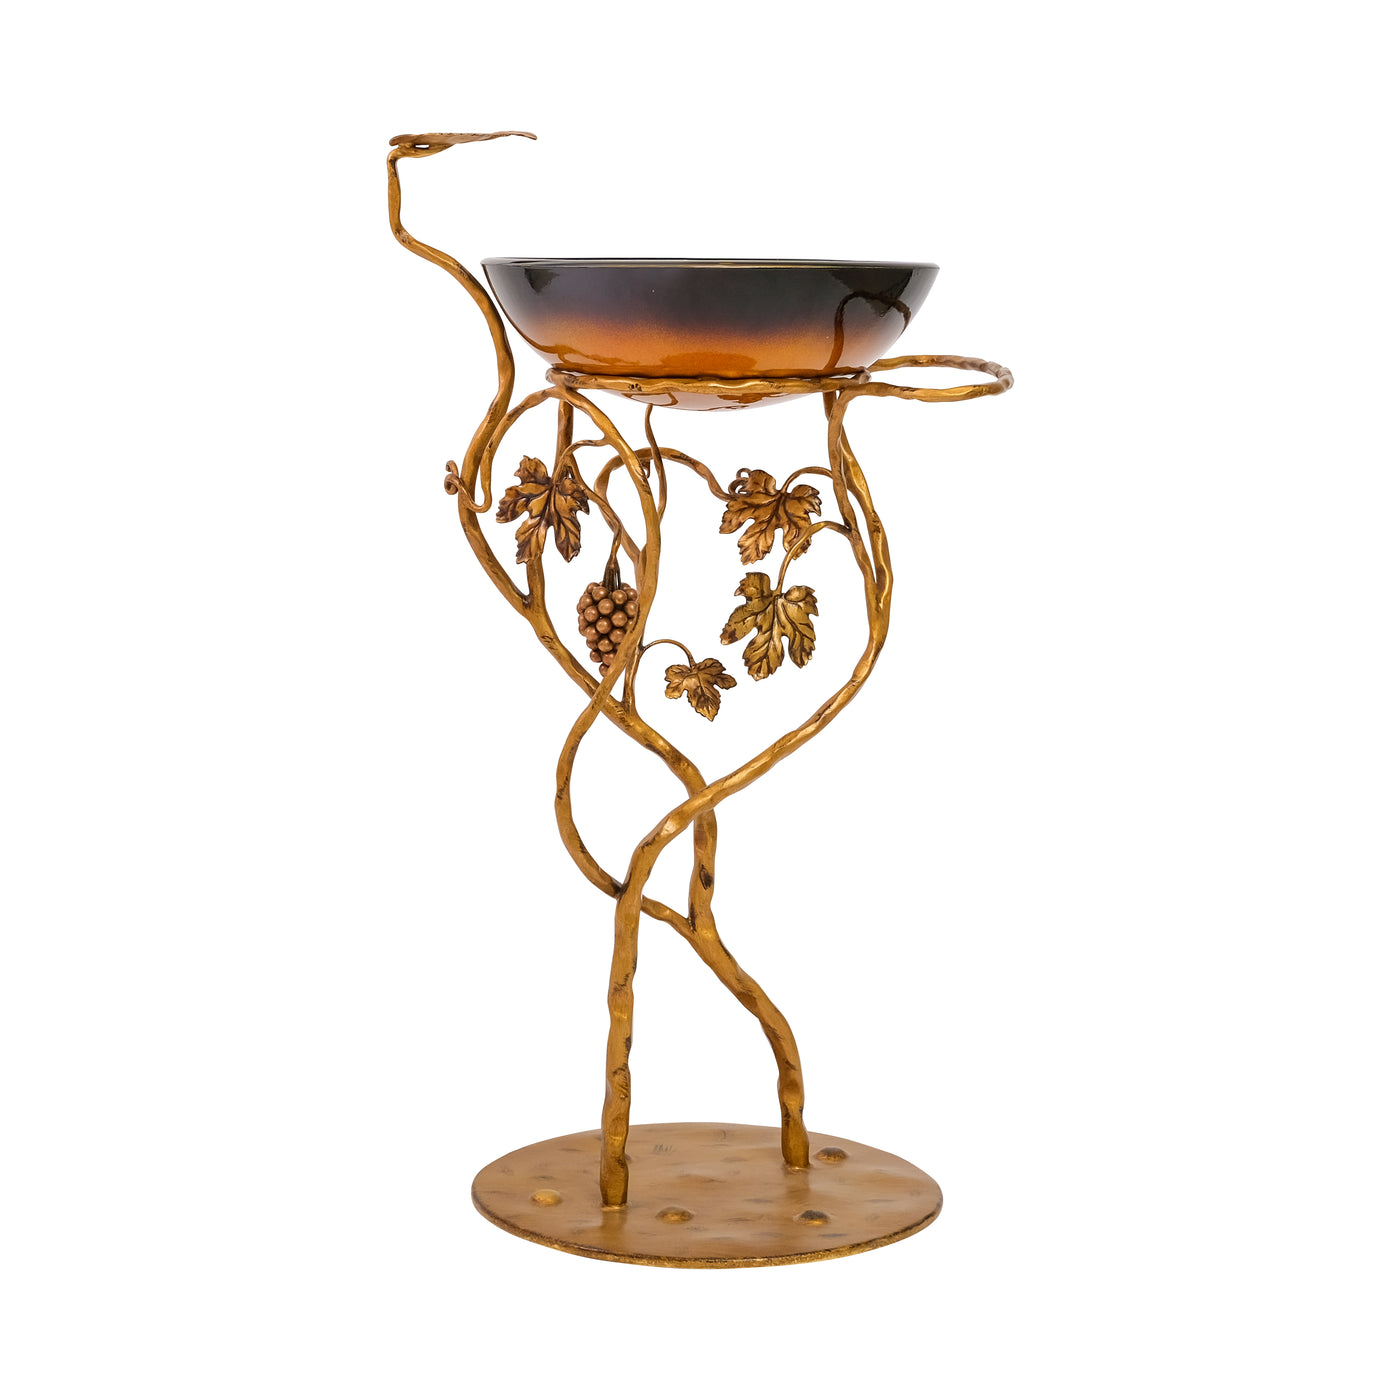 A hand forged metal wash basin stand with base mimicking vines and grapes, painted in an antique golden finish